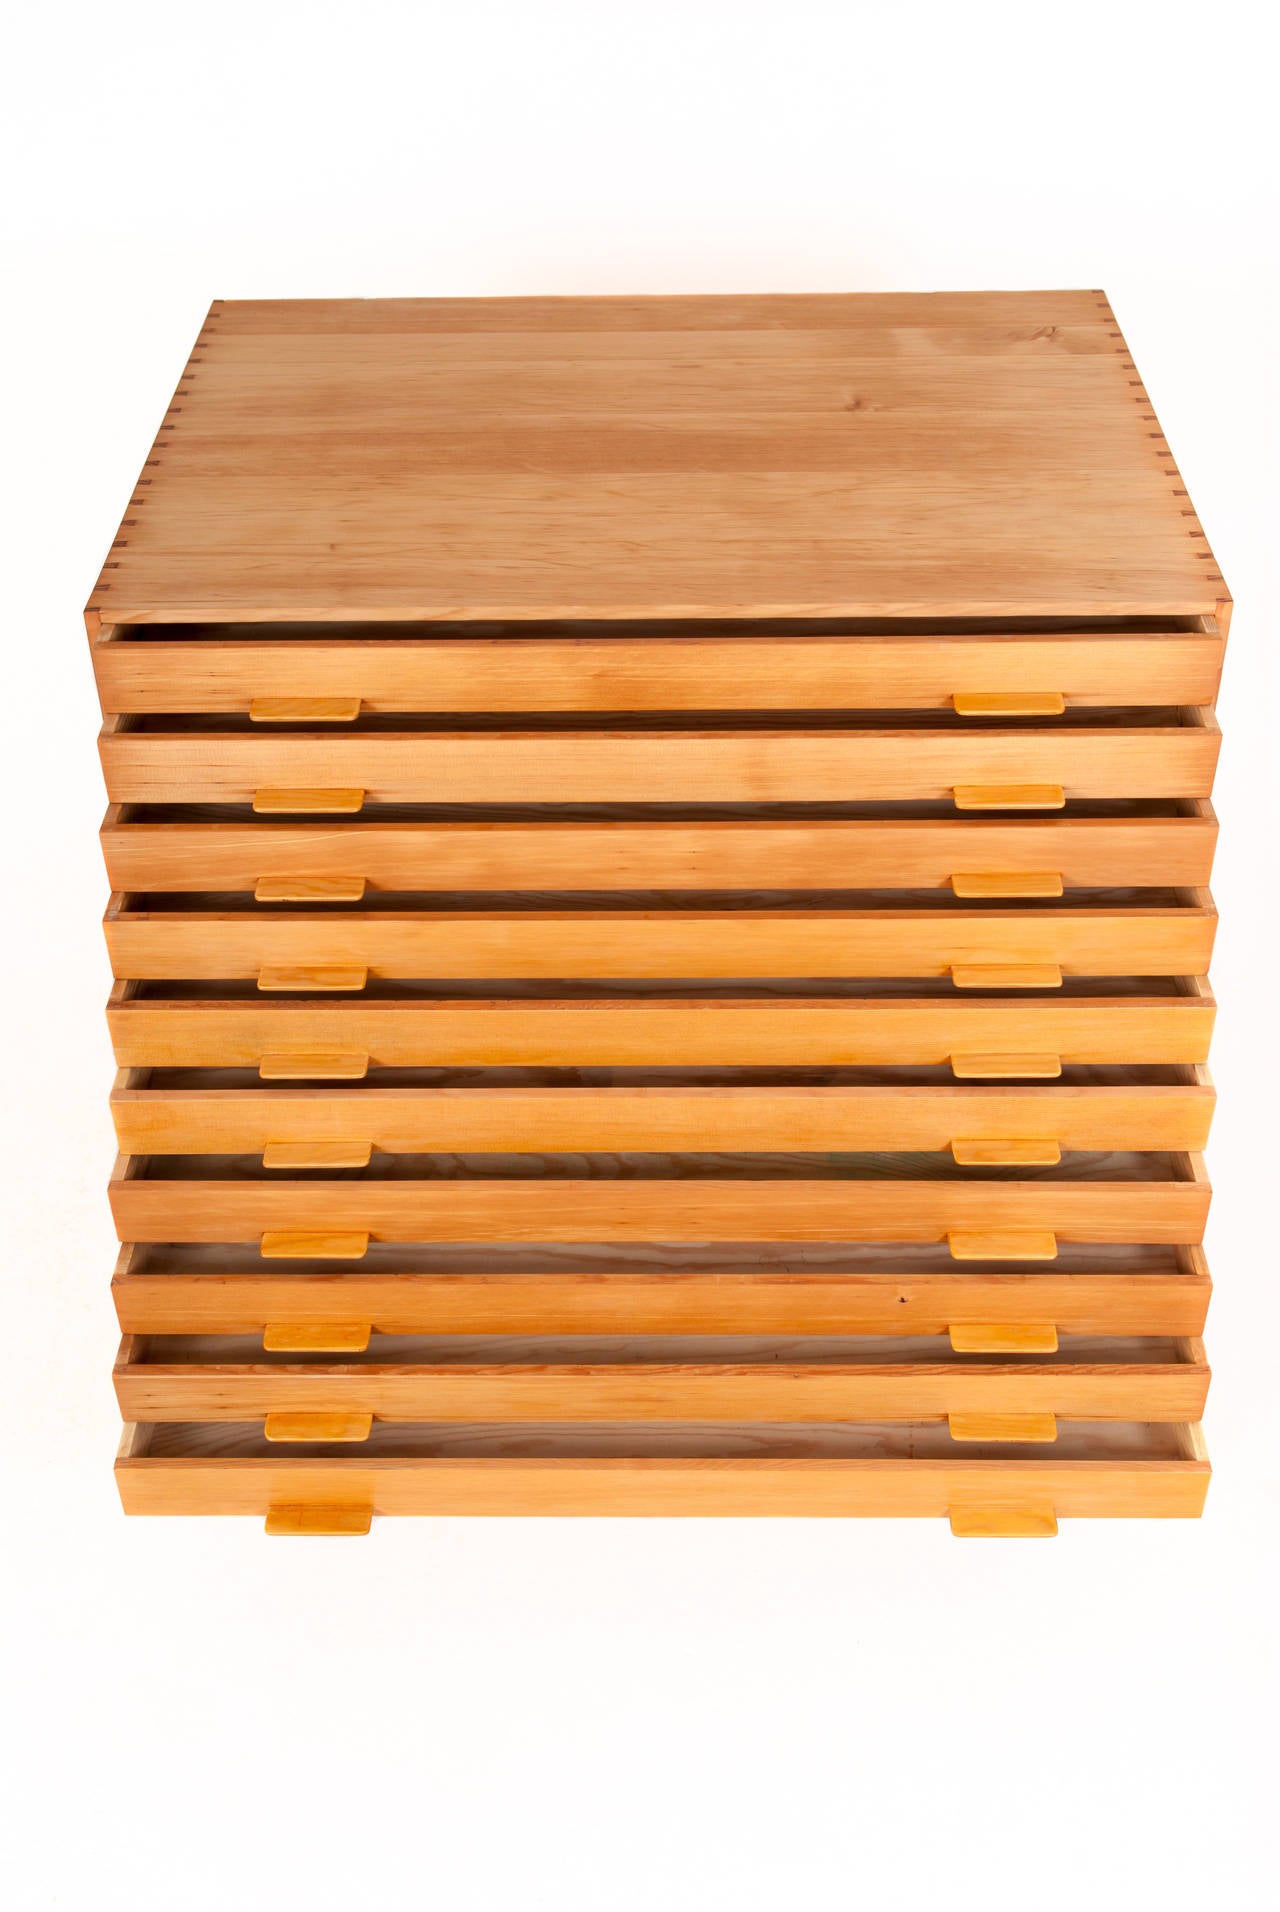 Rare flat file cabinet by Poul Kjærholm in solid Oregon pine

Original inventory from the  School of Architecture at the Royal Academy of Arts.
This cabinet is from the first production of 26 ordered by the school. Made with 10 drawers. 

Burn